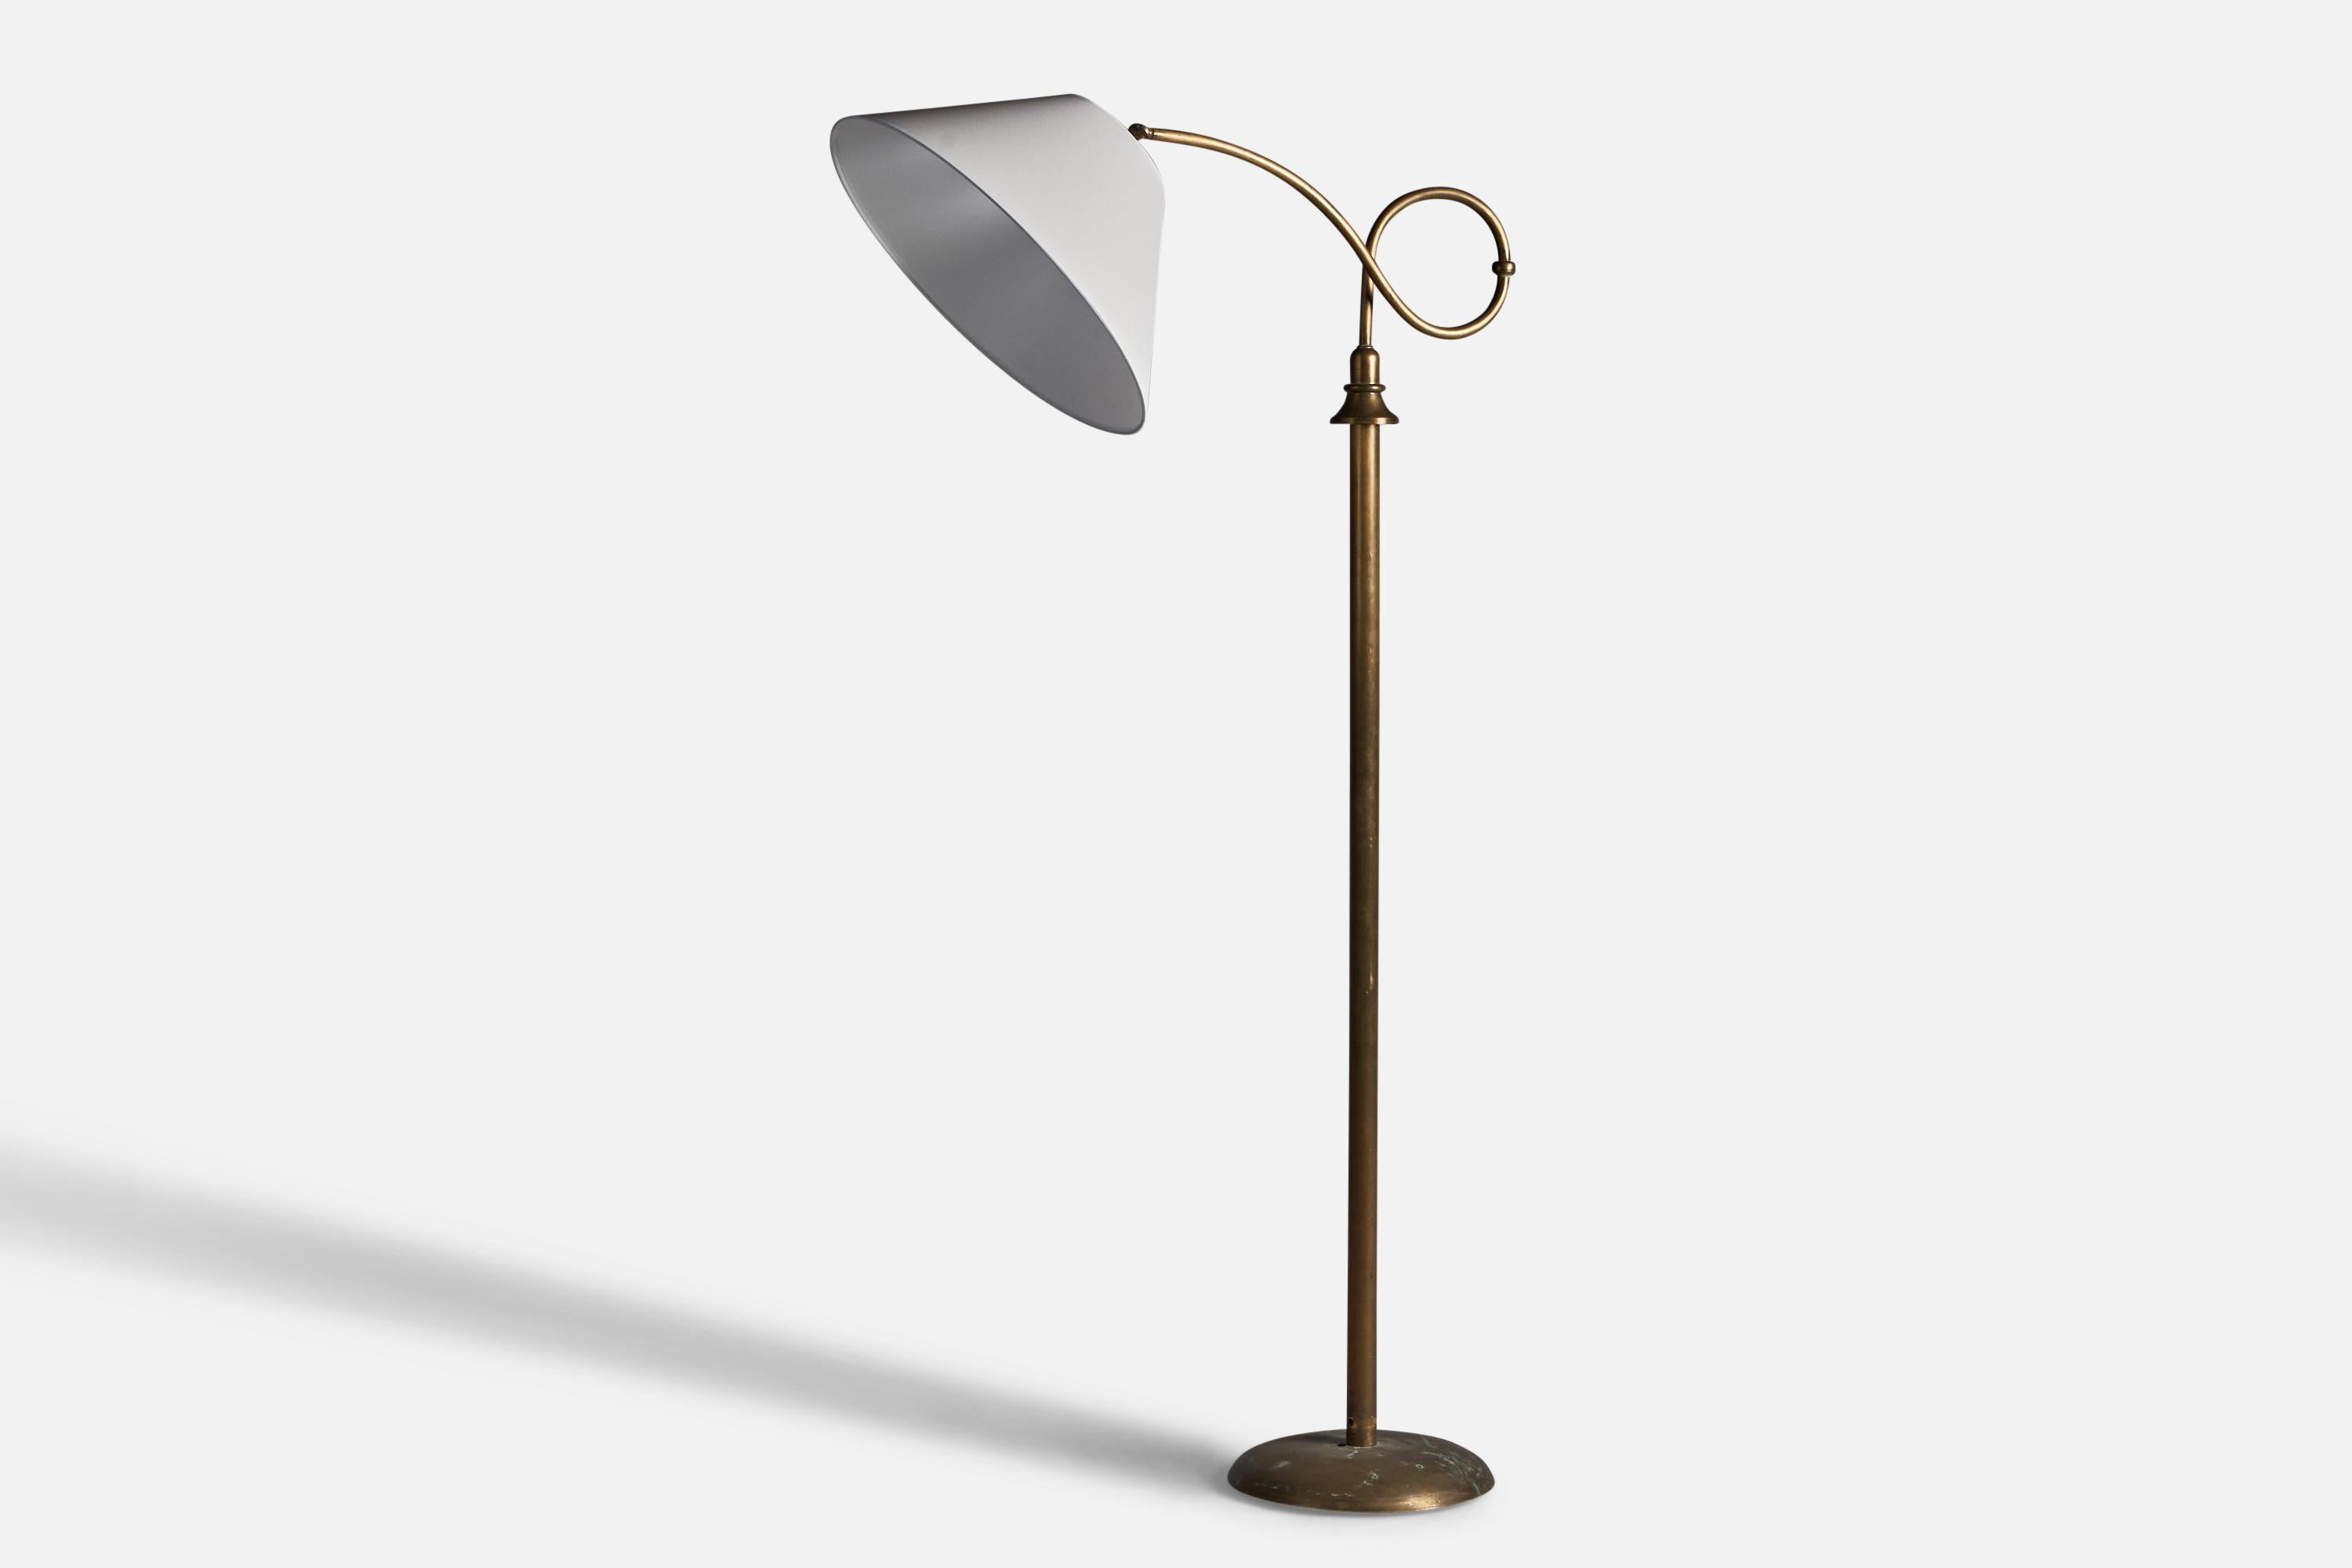 An adjustable brass and white fabric floor lamp, designed and produced in Italy, c. 1940s.

Overall Dimensions (inches): 62.25